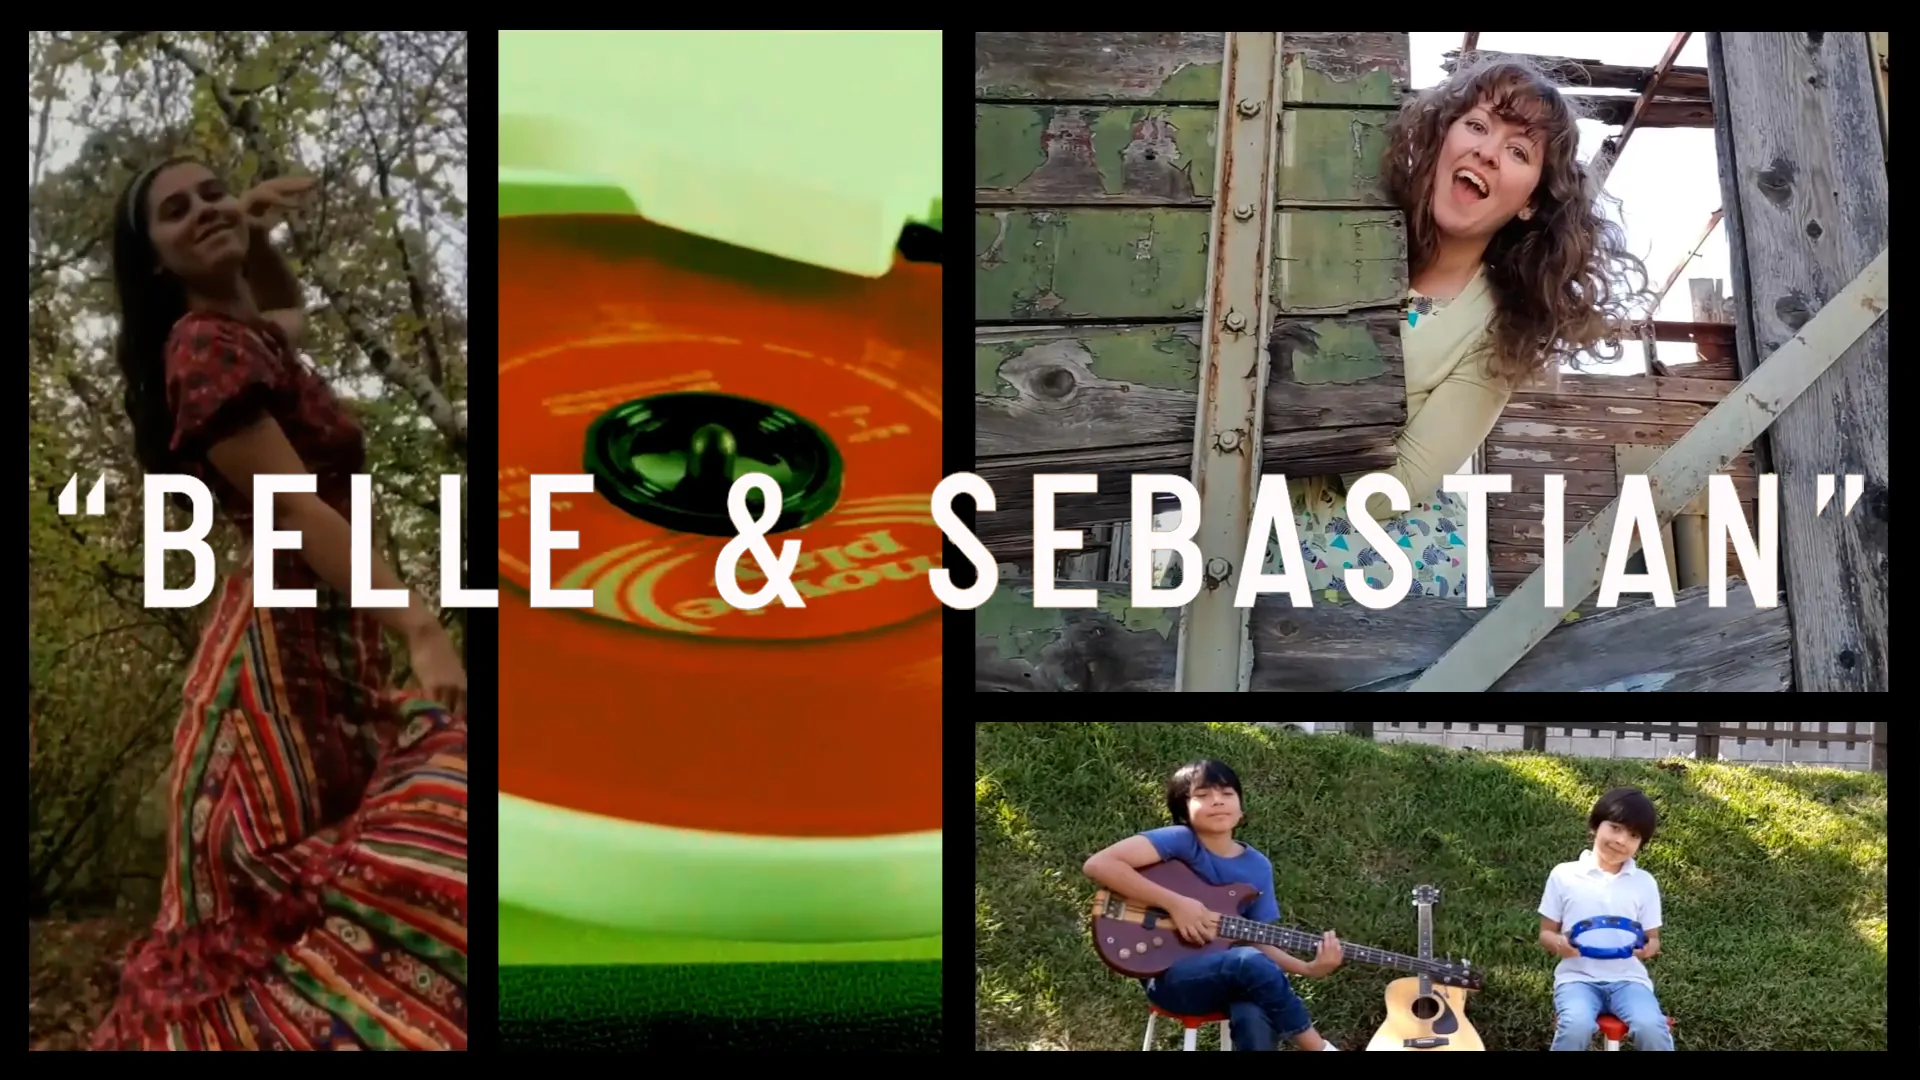 BELLE AND SEBASTIAN release fan sourced lip-sync video for the song ‘Belle and Sebastian’